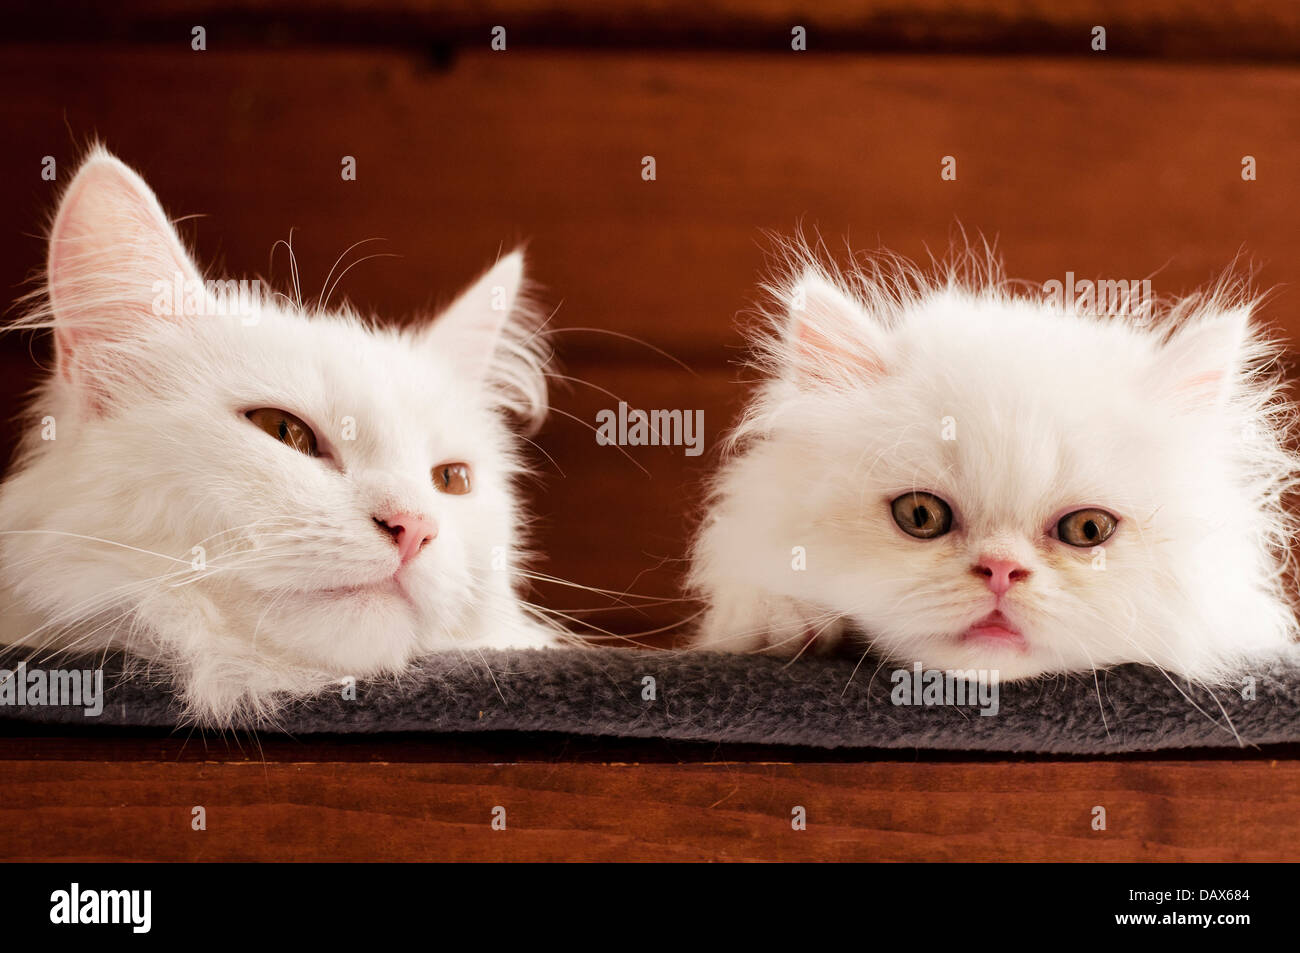 Adorable kitten and cat Stock Photo